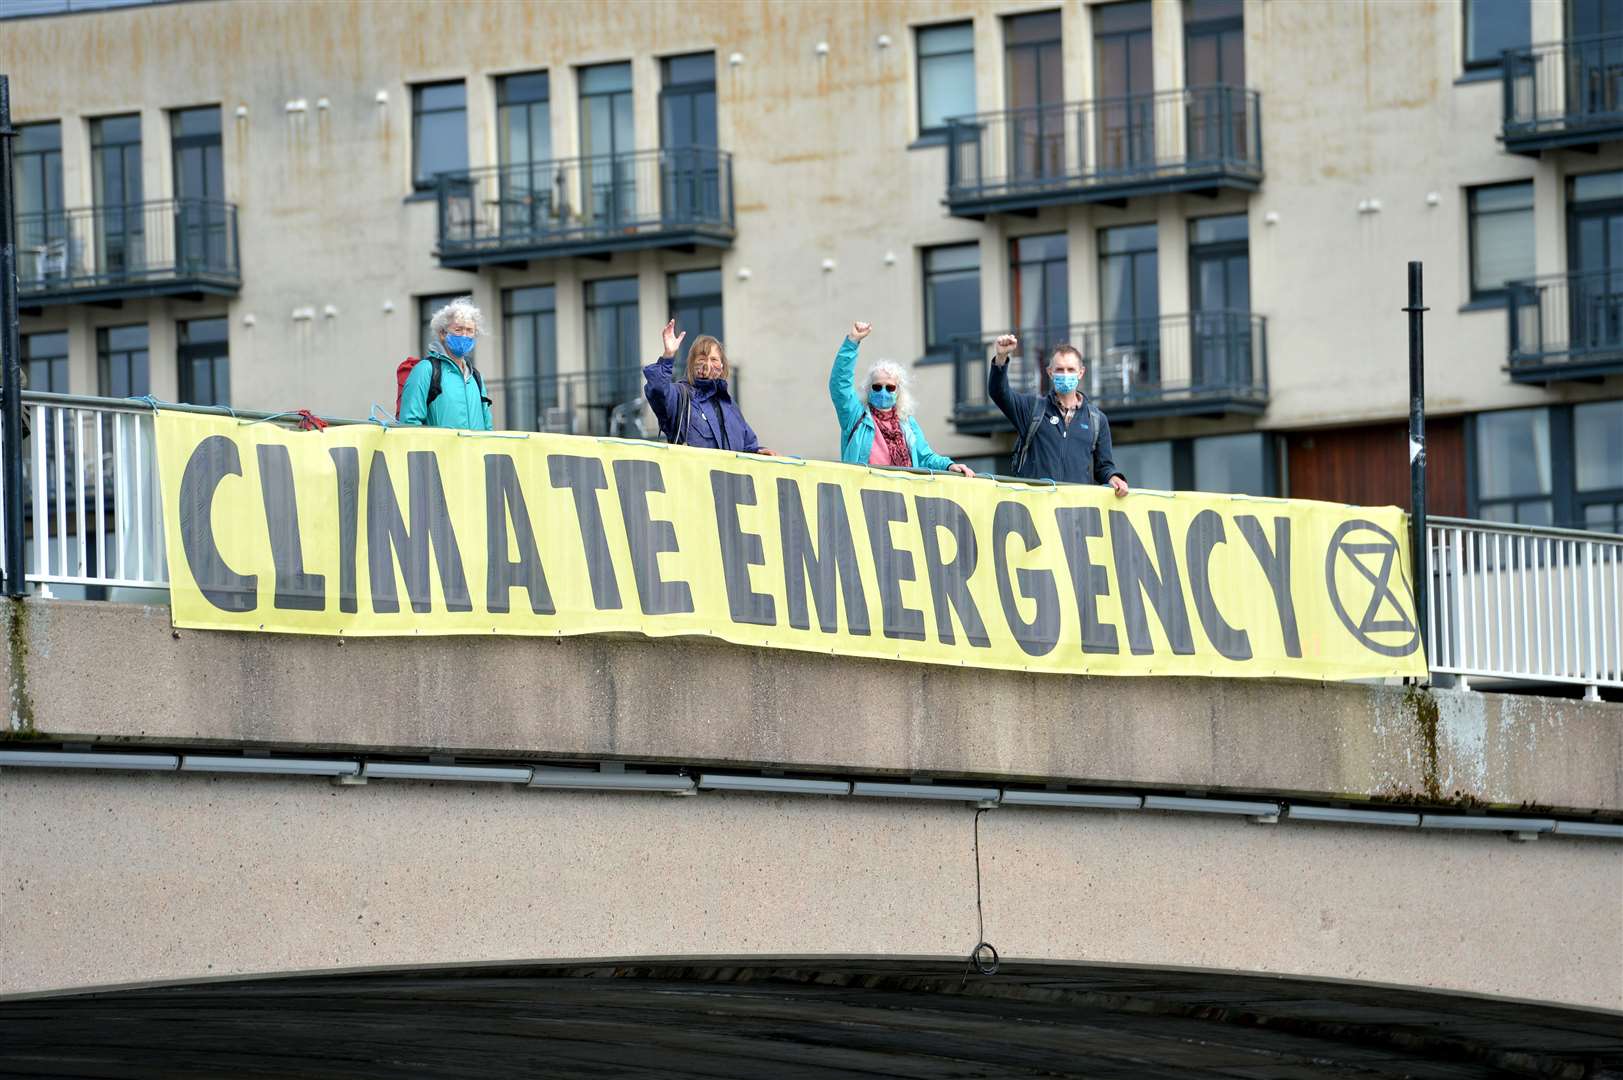 Extinction rebellion (XR) drop banners over Ness Bridge and protestors carrying flags and placards over role of banks in funding fossil fuels. Picture: Callum Mackay.